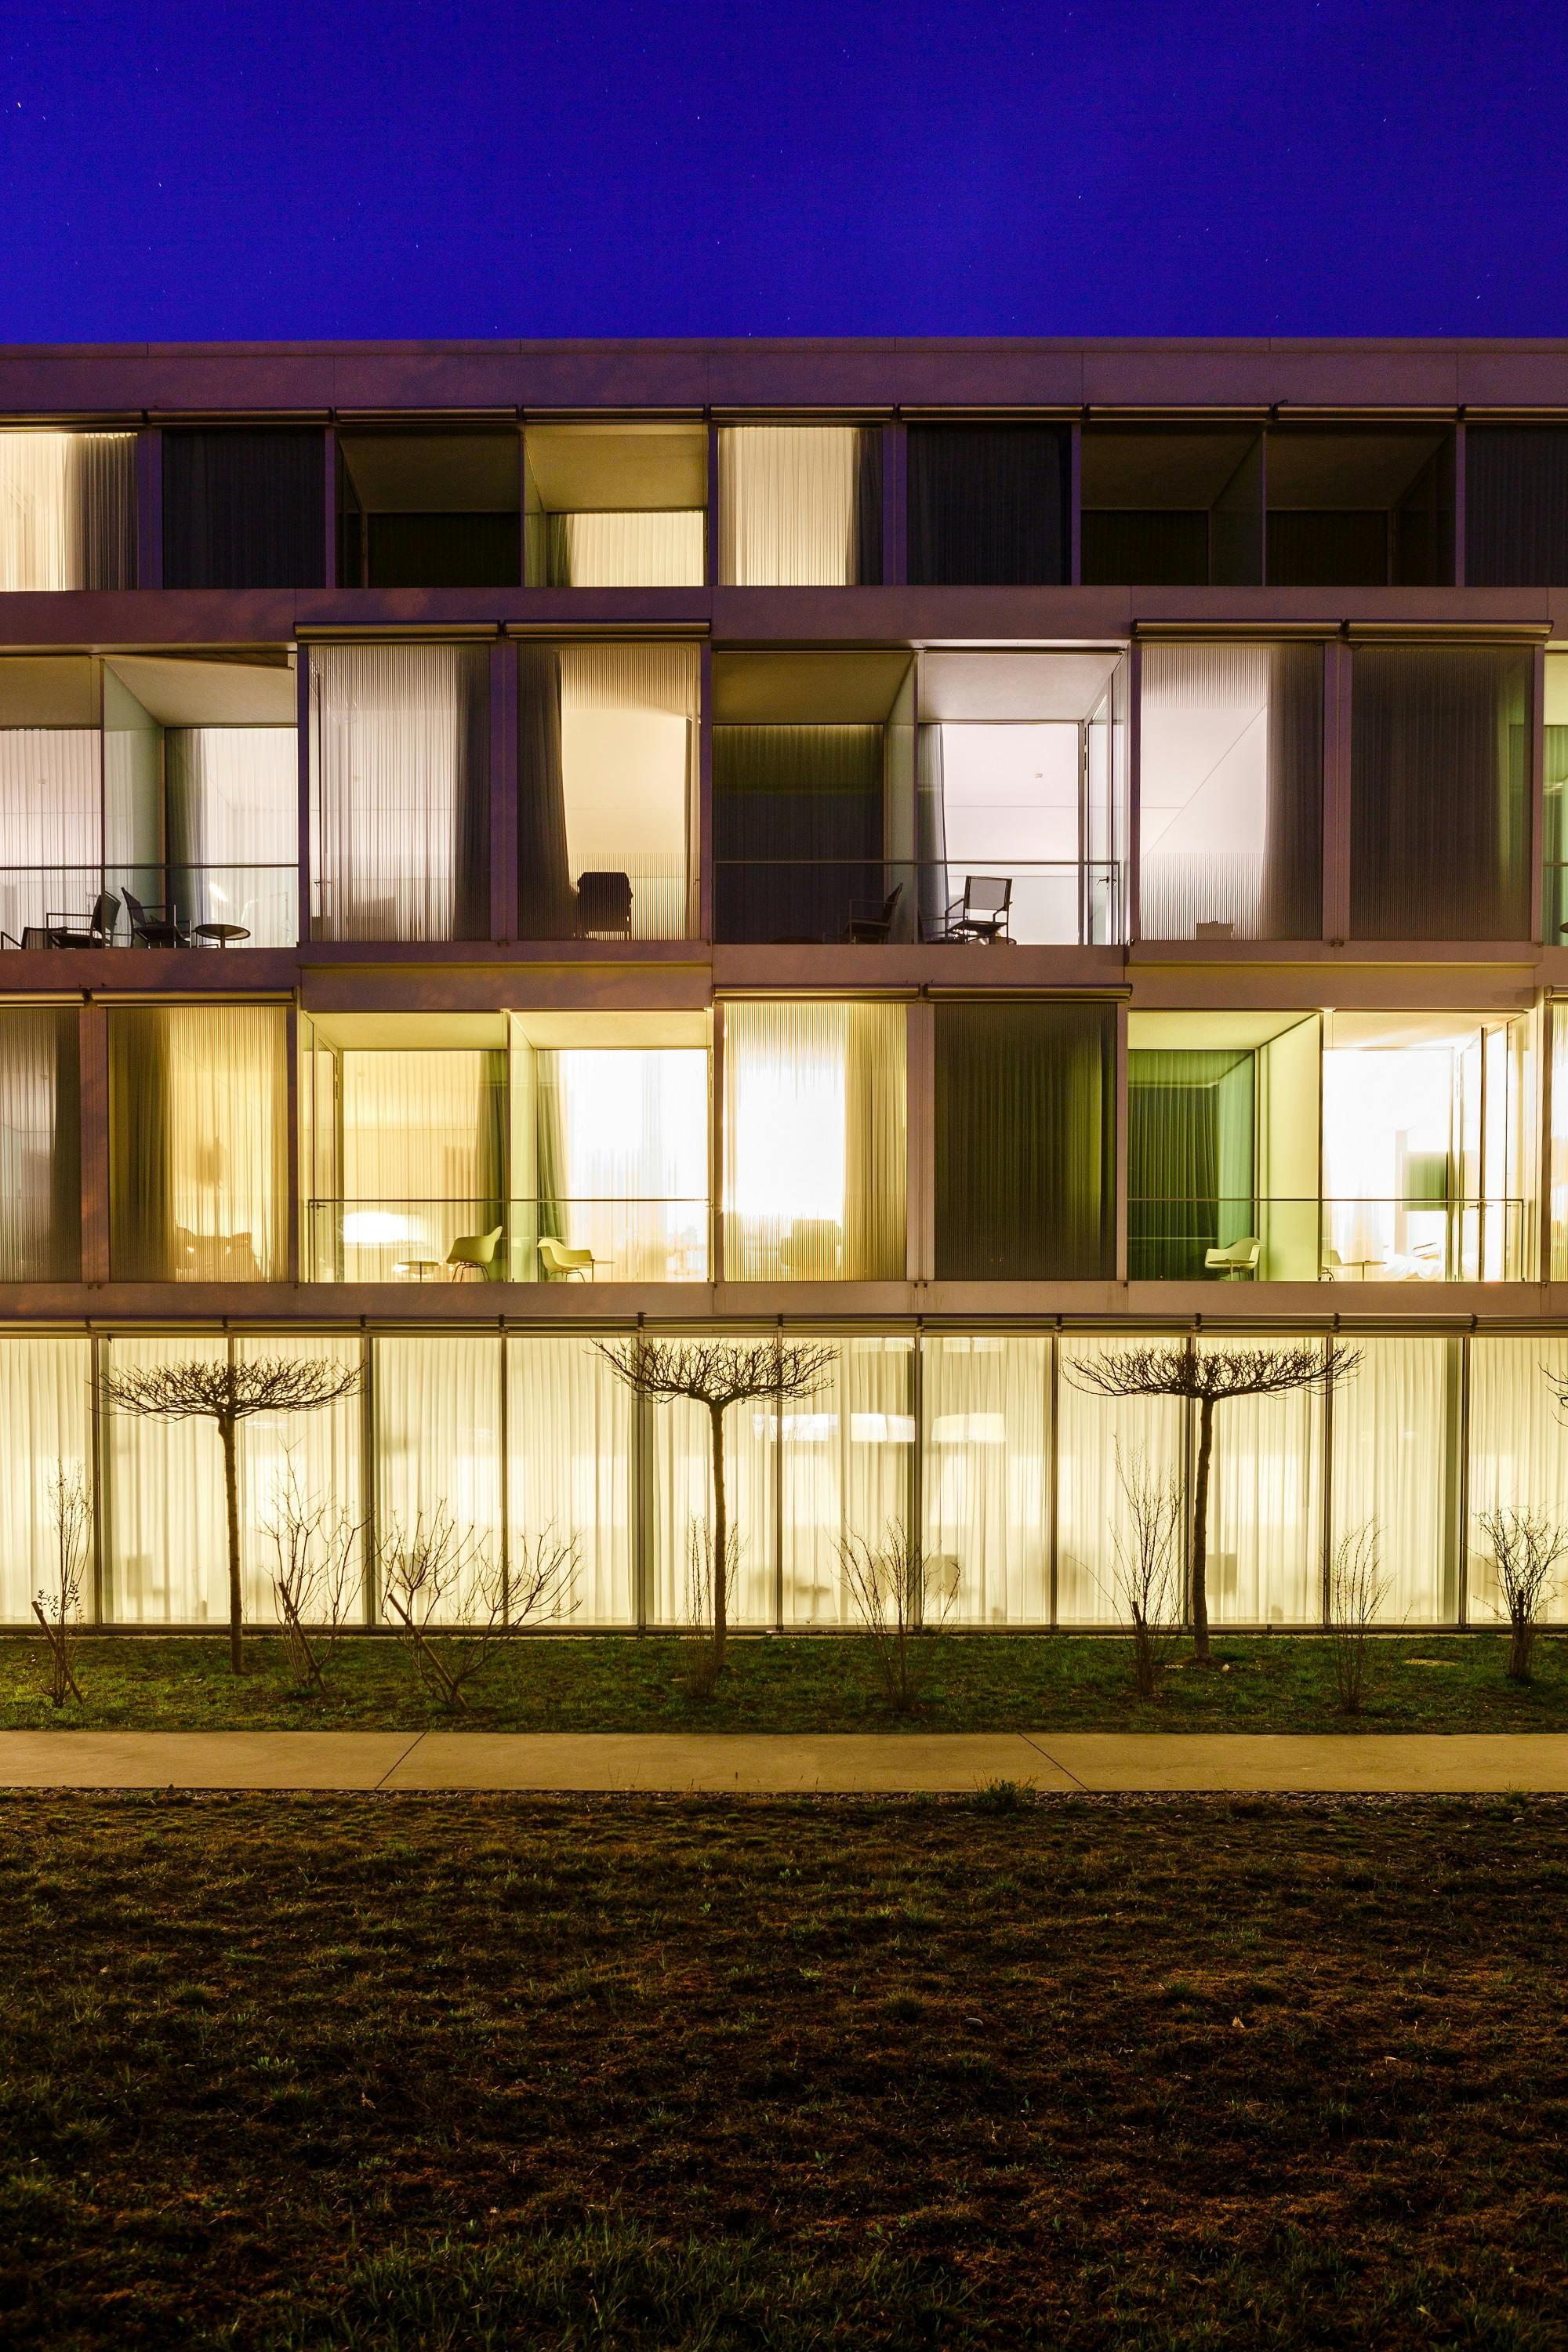 Illuminated façade of a modern residential building at night with visible interiors and trees in the foreground.